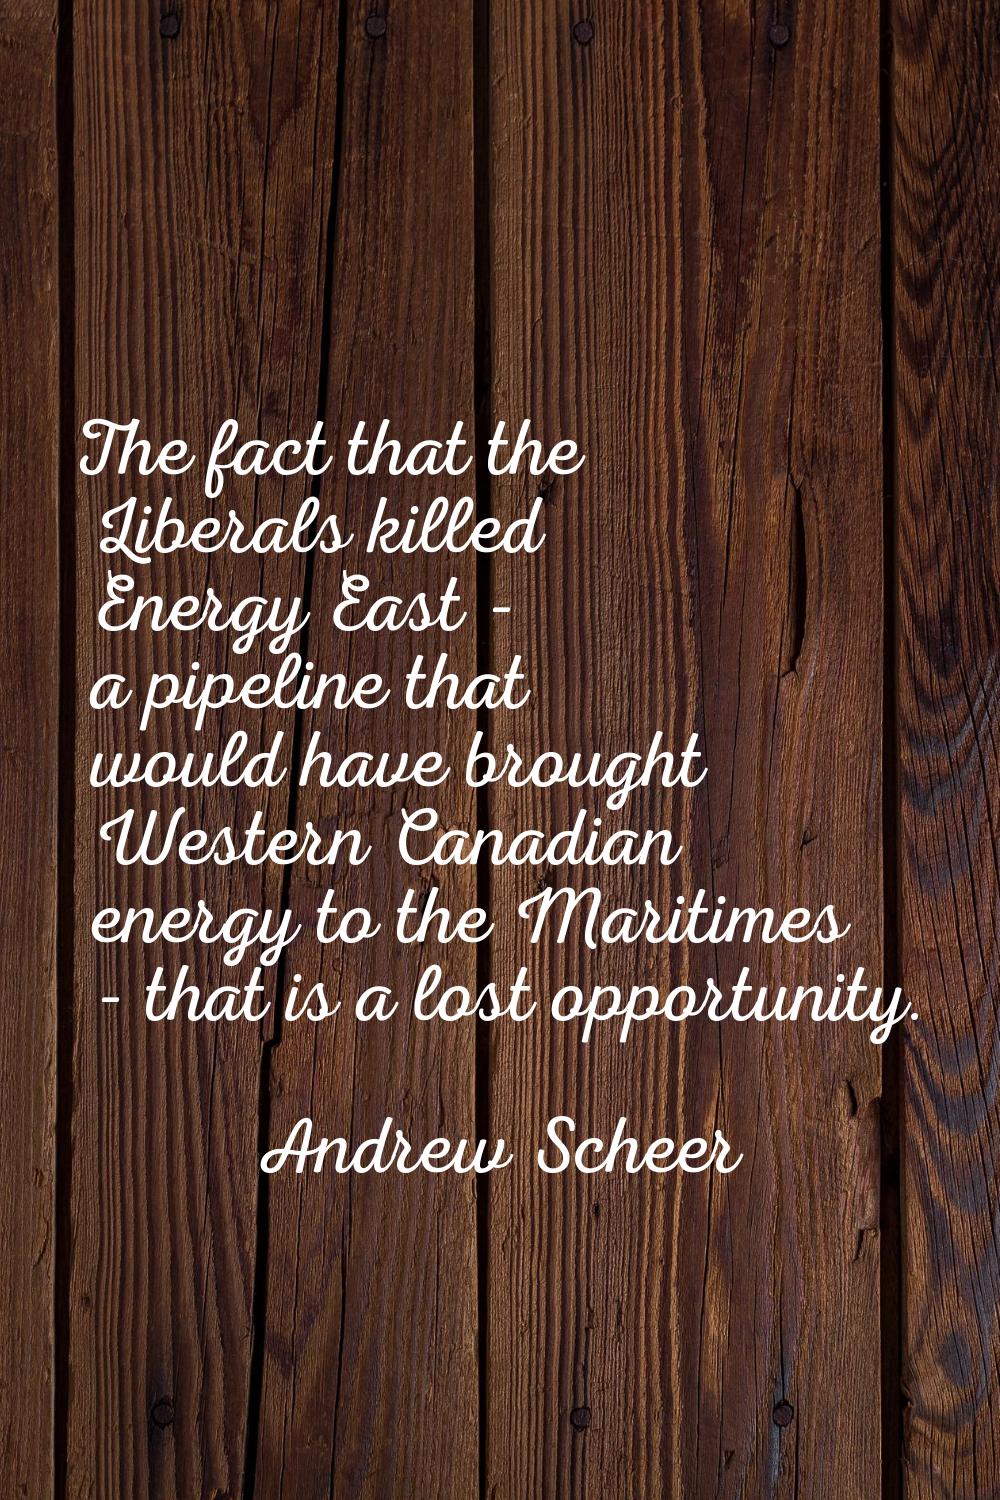 The fact that the Liberals killed Energy East - a pipeline that would have brought Western Canadian